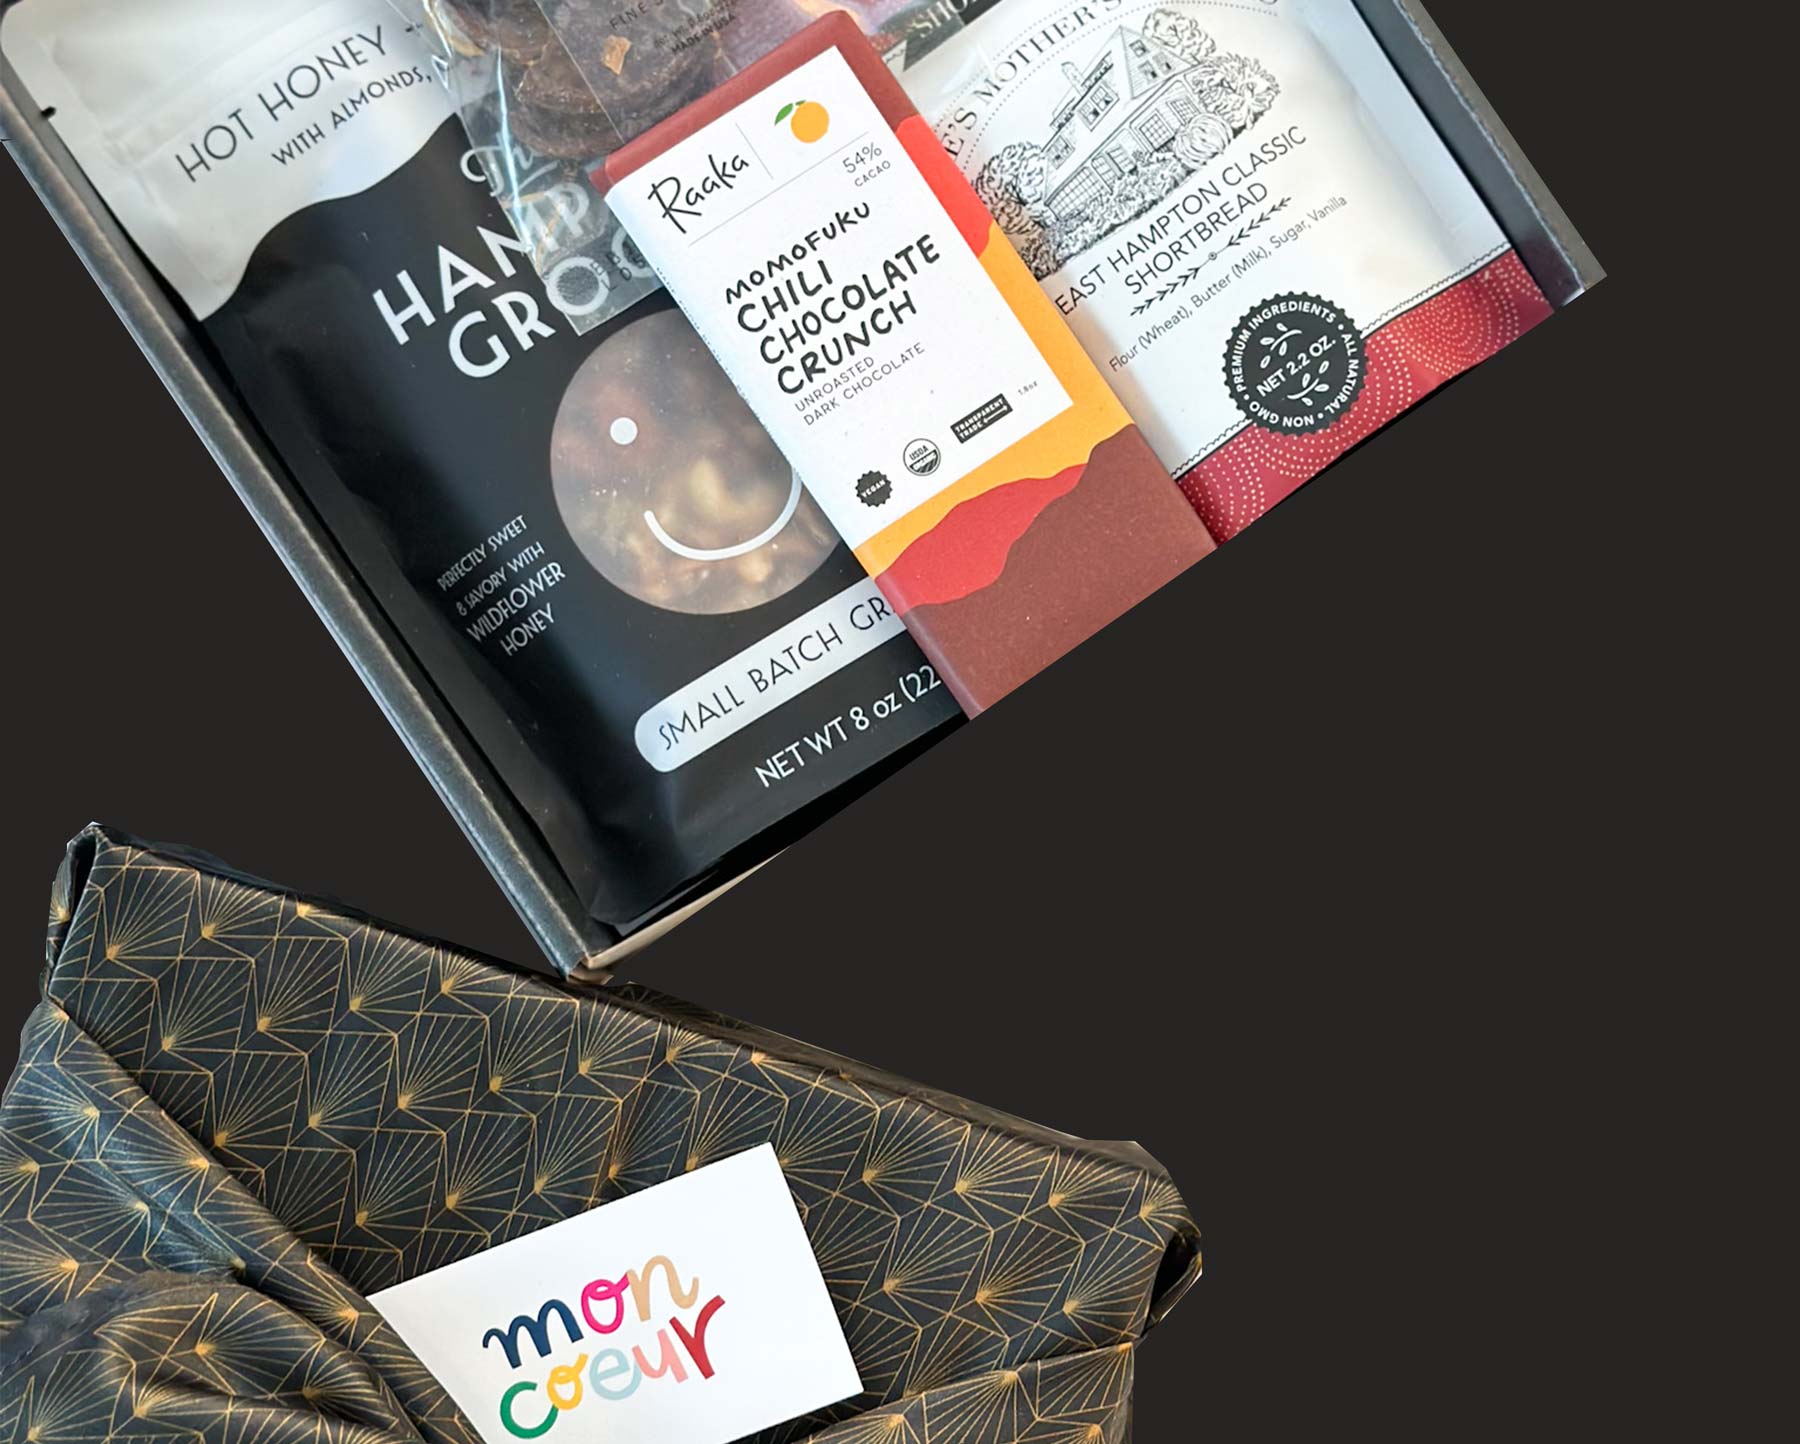 kadoo custom curated gift box for everyday and corporate clients. Gourmet snack with raaka momoffuku chocolate, granola, cookie, orange slice, maple syrup and more